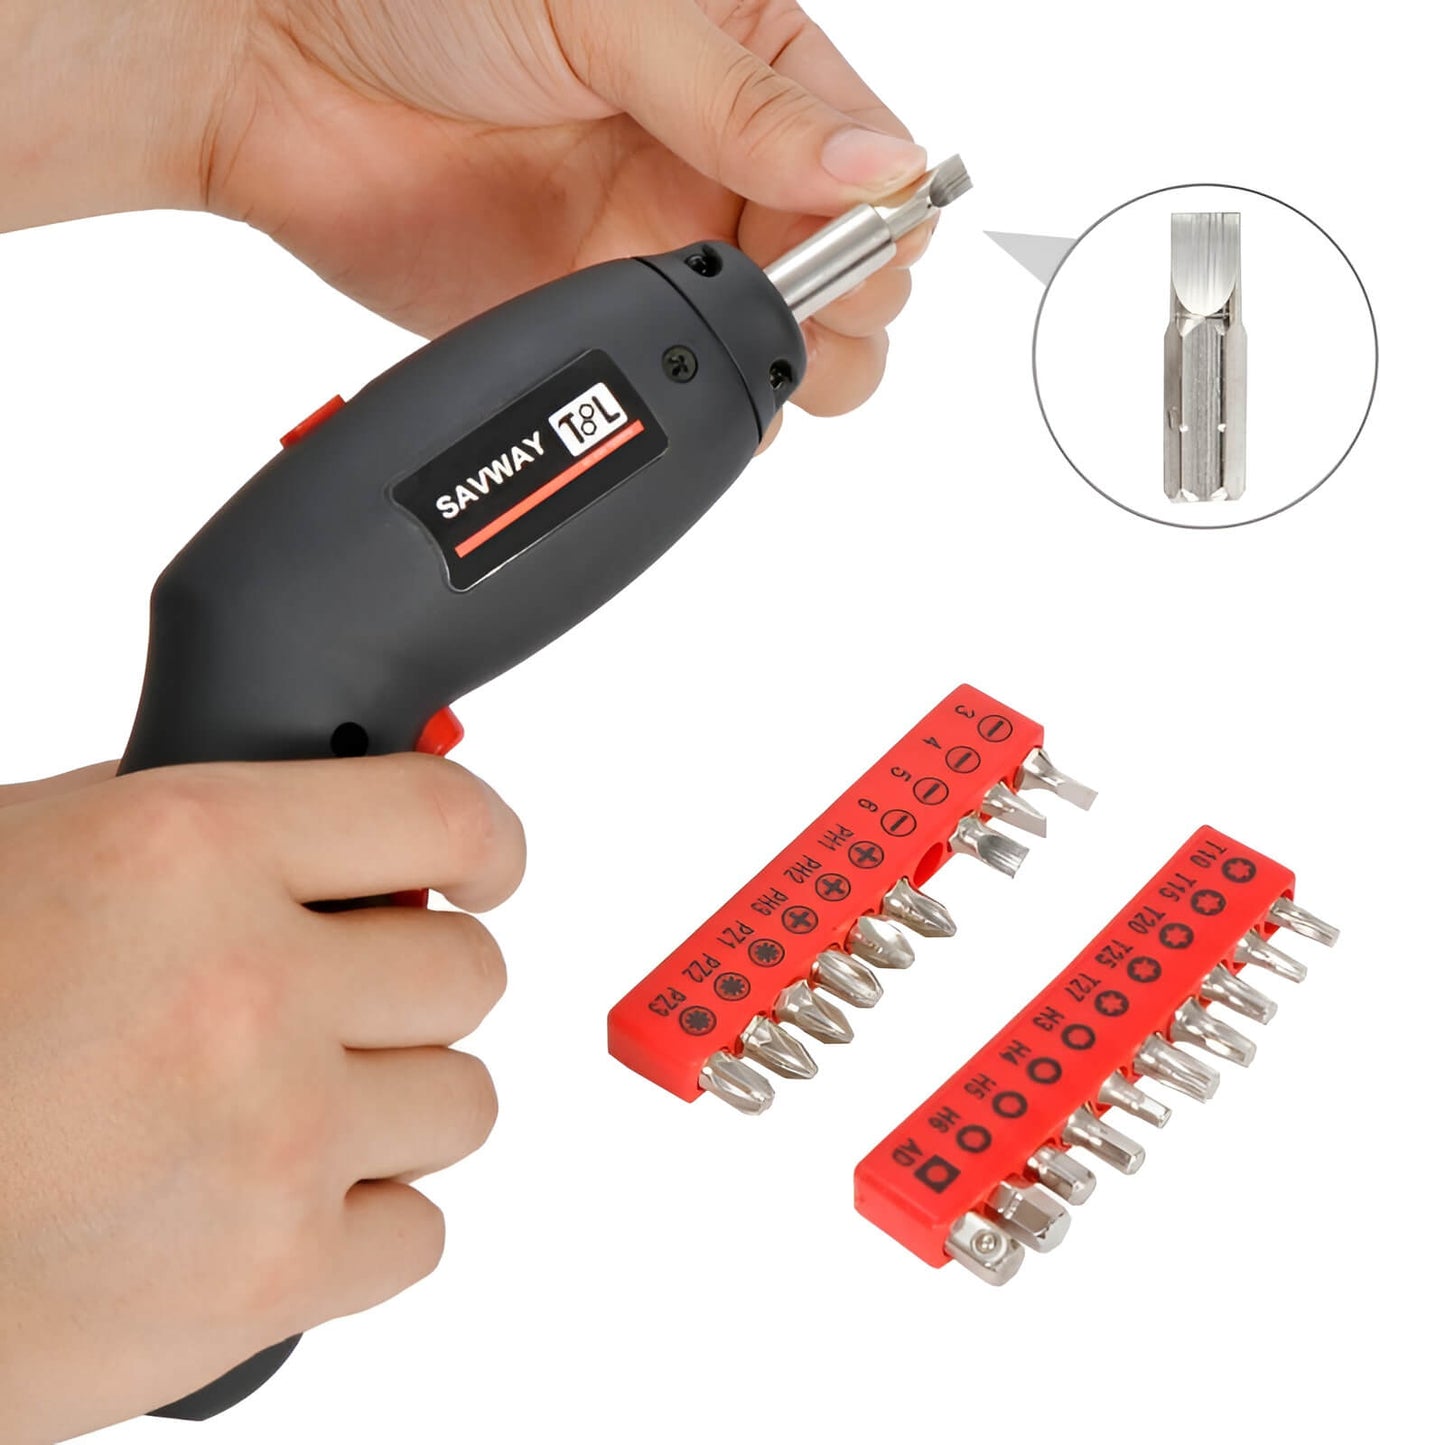 143-piece Home Tool Kit with Cordless Screwdriver